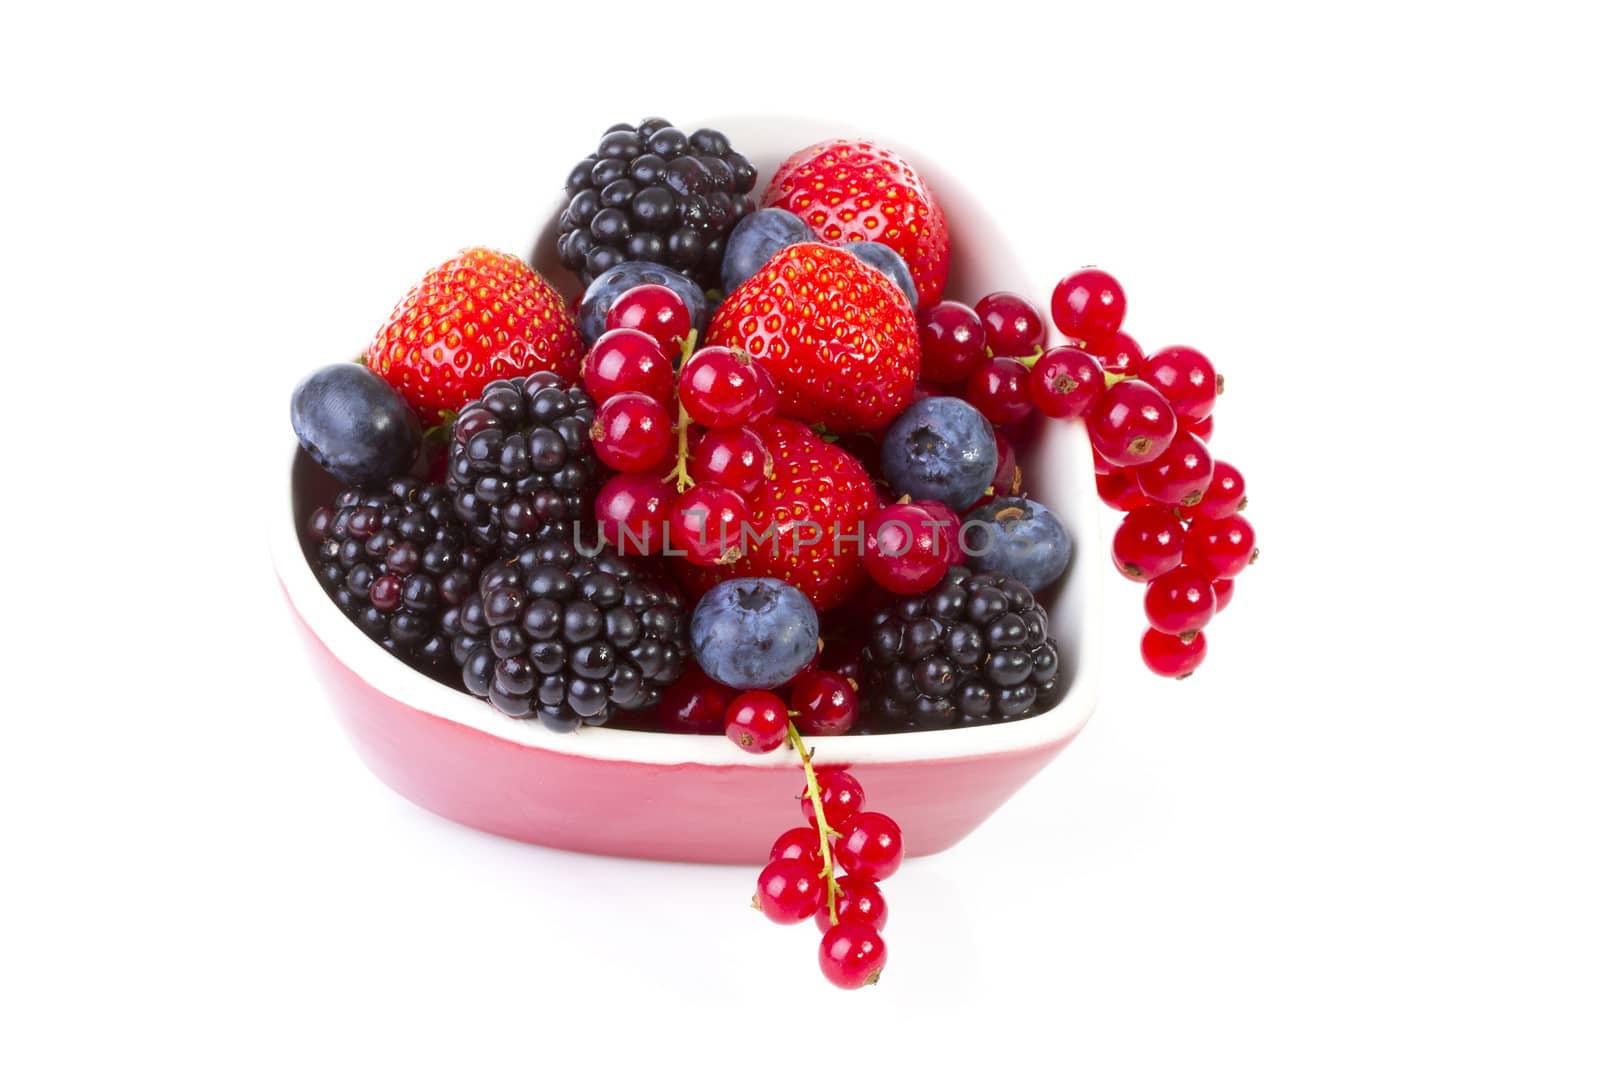 Bowl with fresh fruit over white background